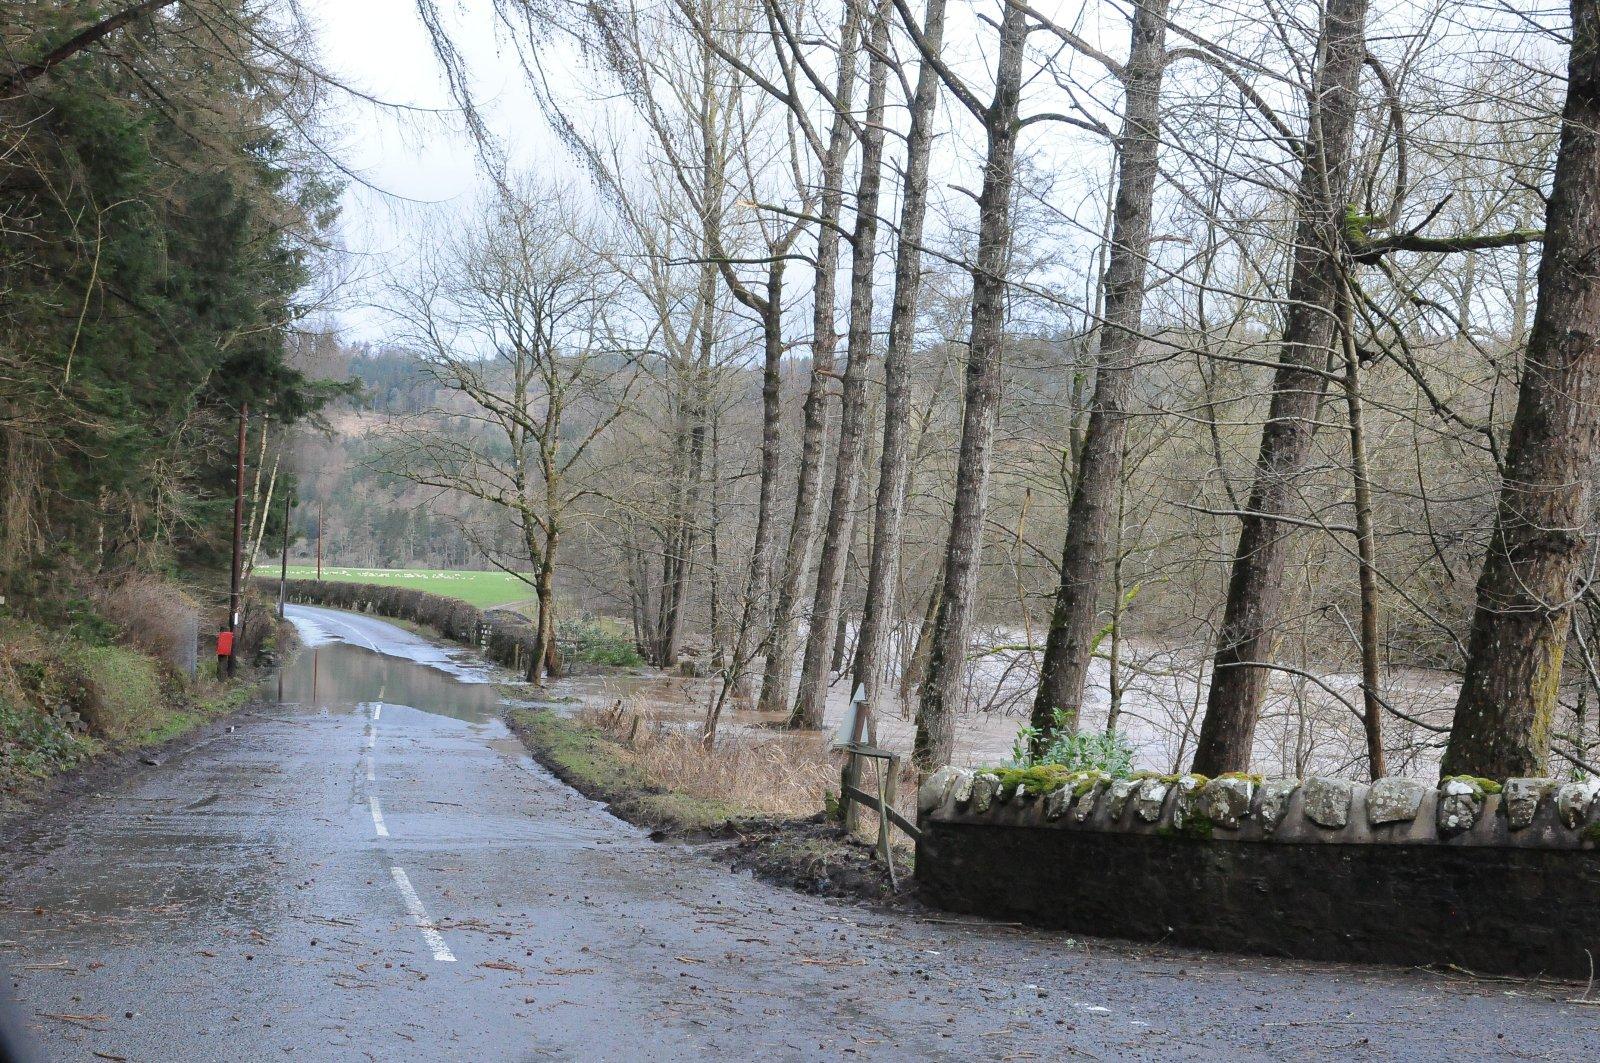 Flooding in the Ettrick Valley.